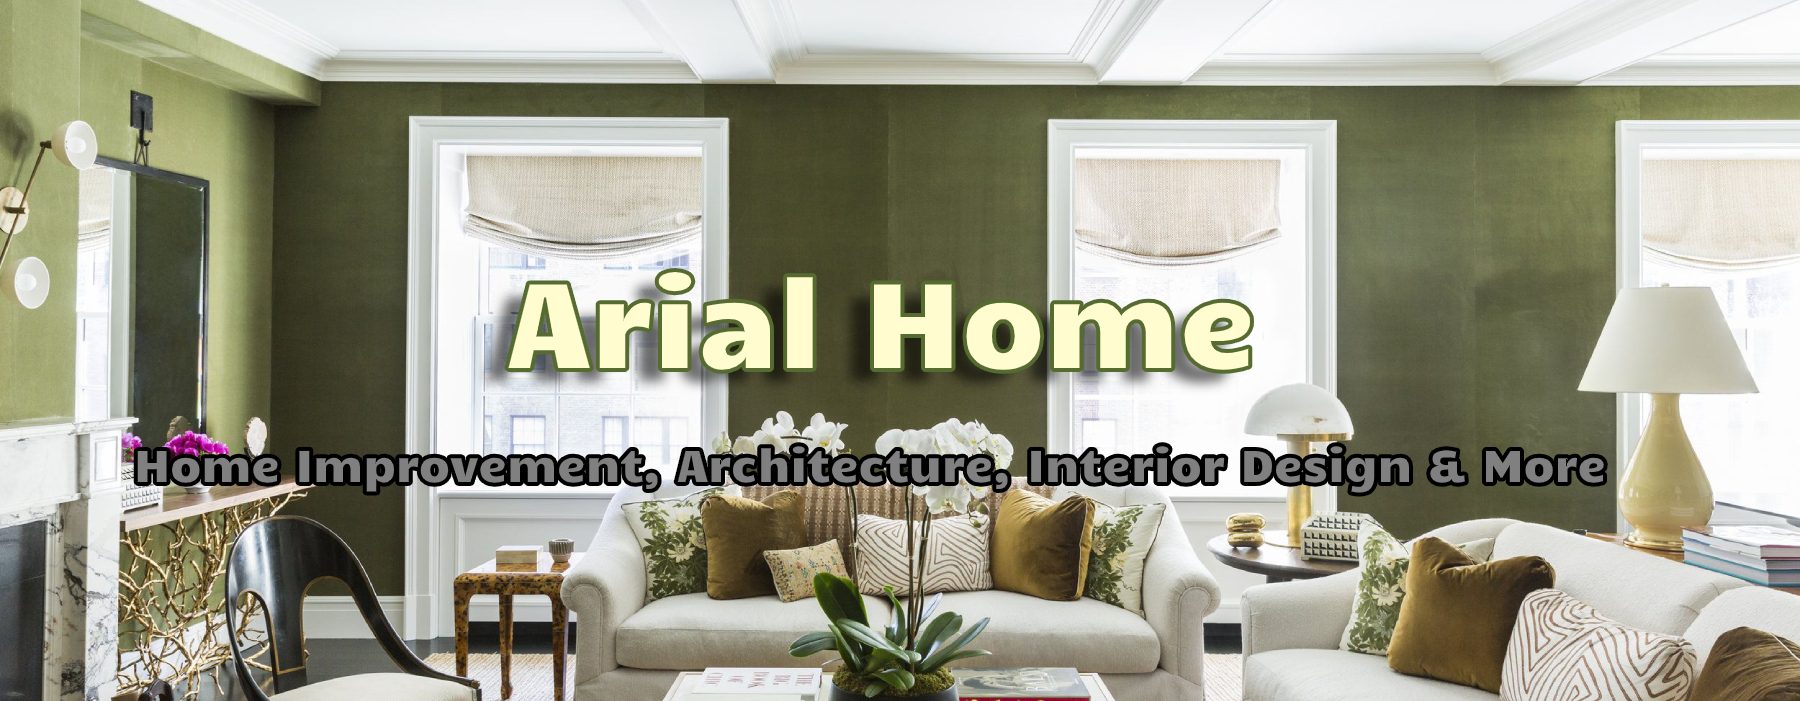 Arial Home